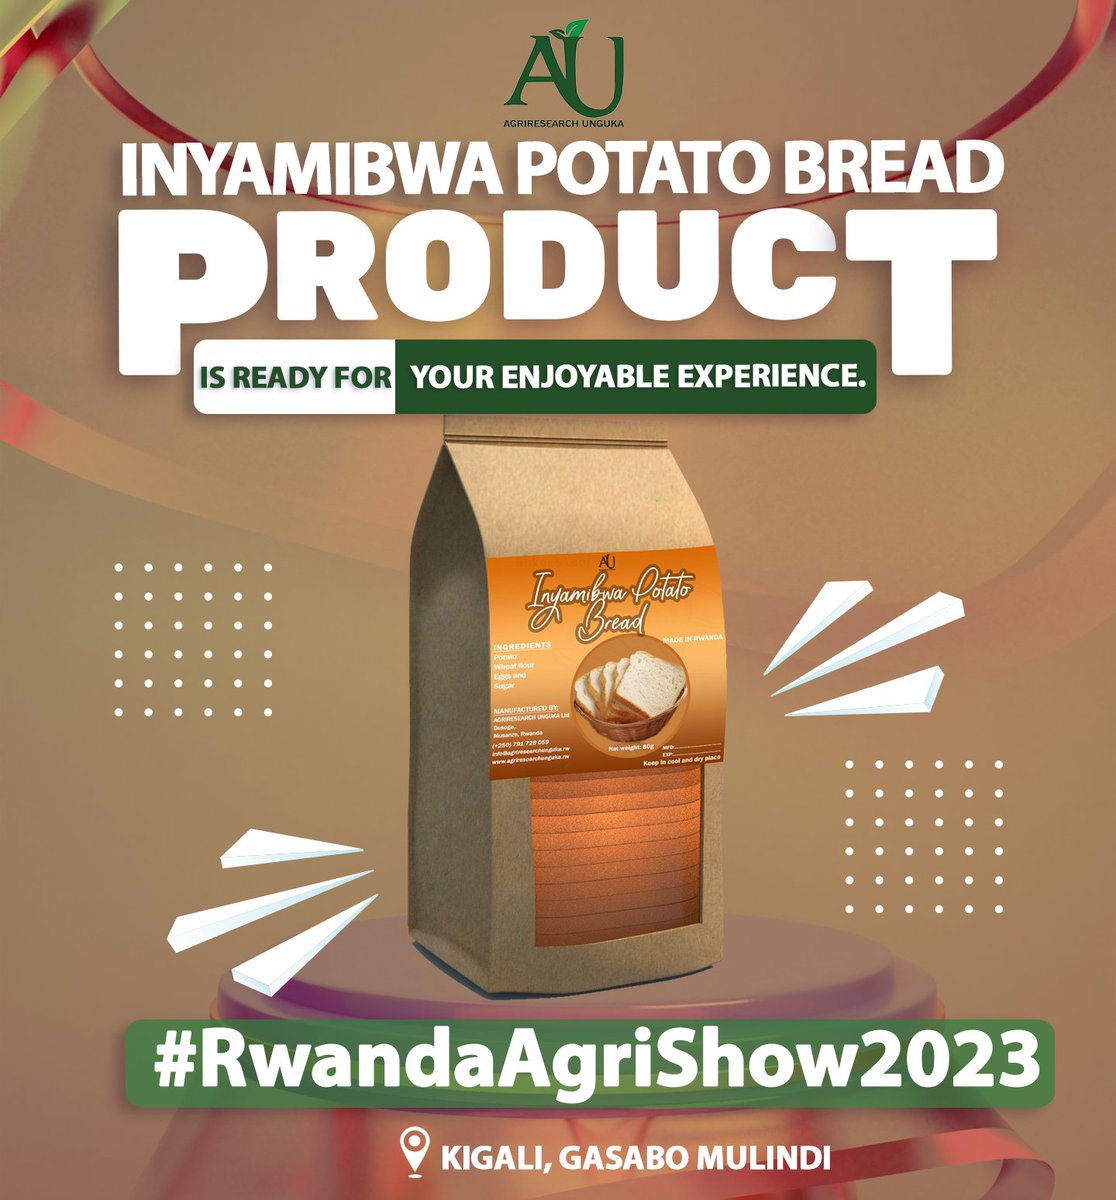 If you haven't had a chance to taste #InyamibwaPotatoBread, Don't worry about anything ~we've got you covered! Find us in #RwandaAgriShow2023. 
Visit our stand you will like the experience and much more the taste!
Date: 20th - 29th July 2023

 #2Days to go! See you there.